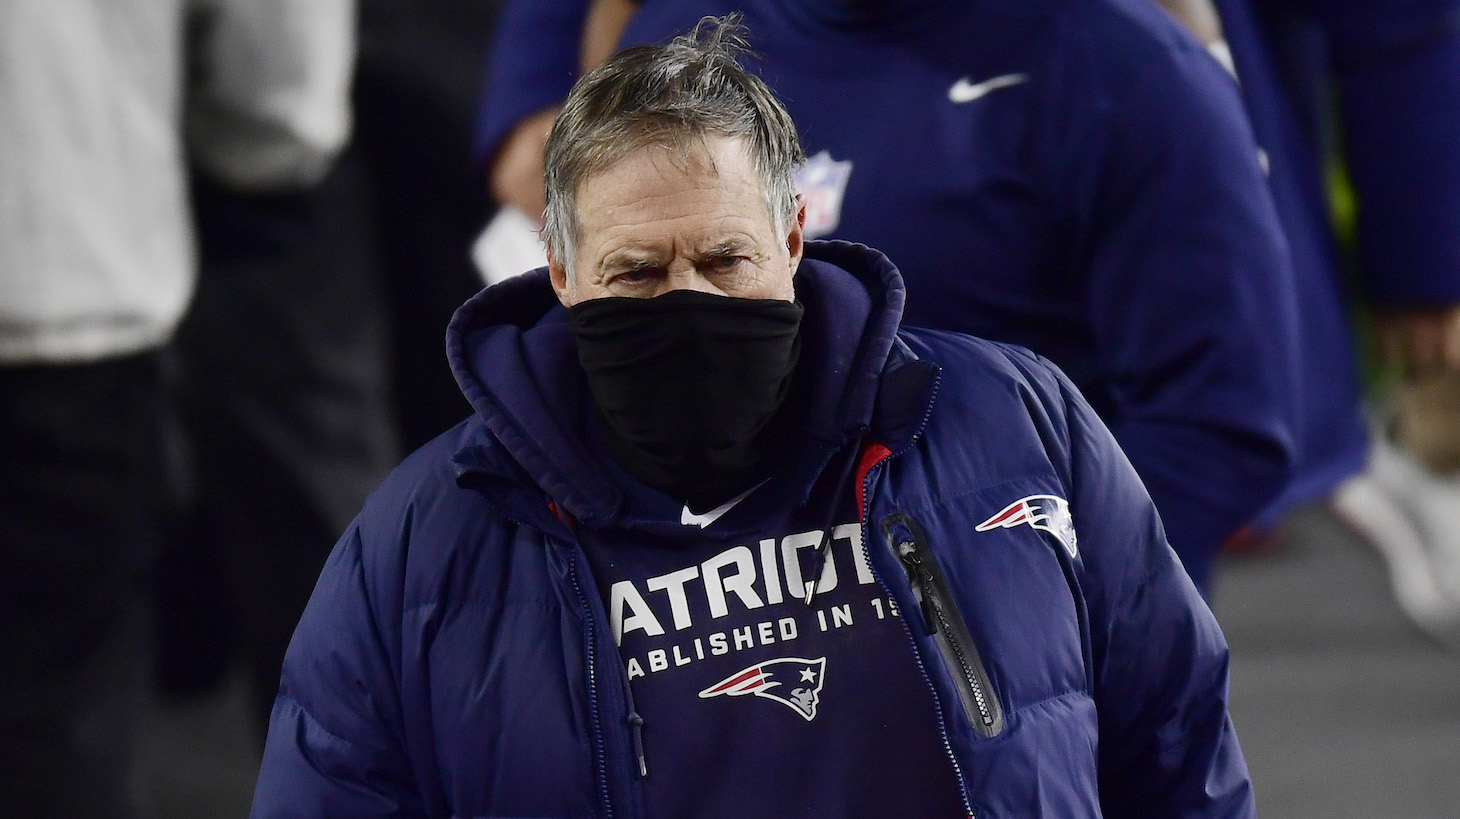 FOXBOROUGH, MASSACHUSETTS - DECEMBER 28: Head coach Bill Belichick of the New England Patriots exits the field after the first half against the Buffalo Bills at Gillette Stadium on December 28, 2020 in Foxborough, Massachusetts. (Photo by Billie Weiss/Getty Images)